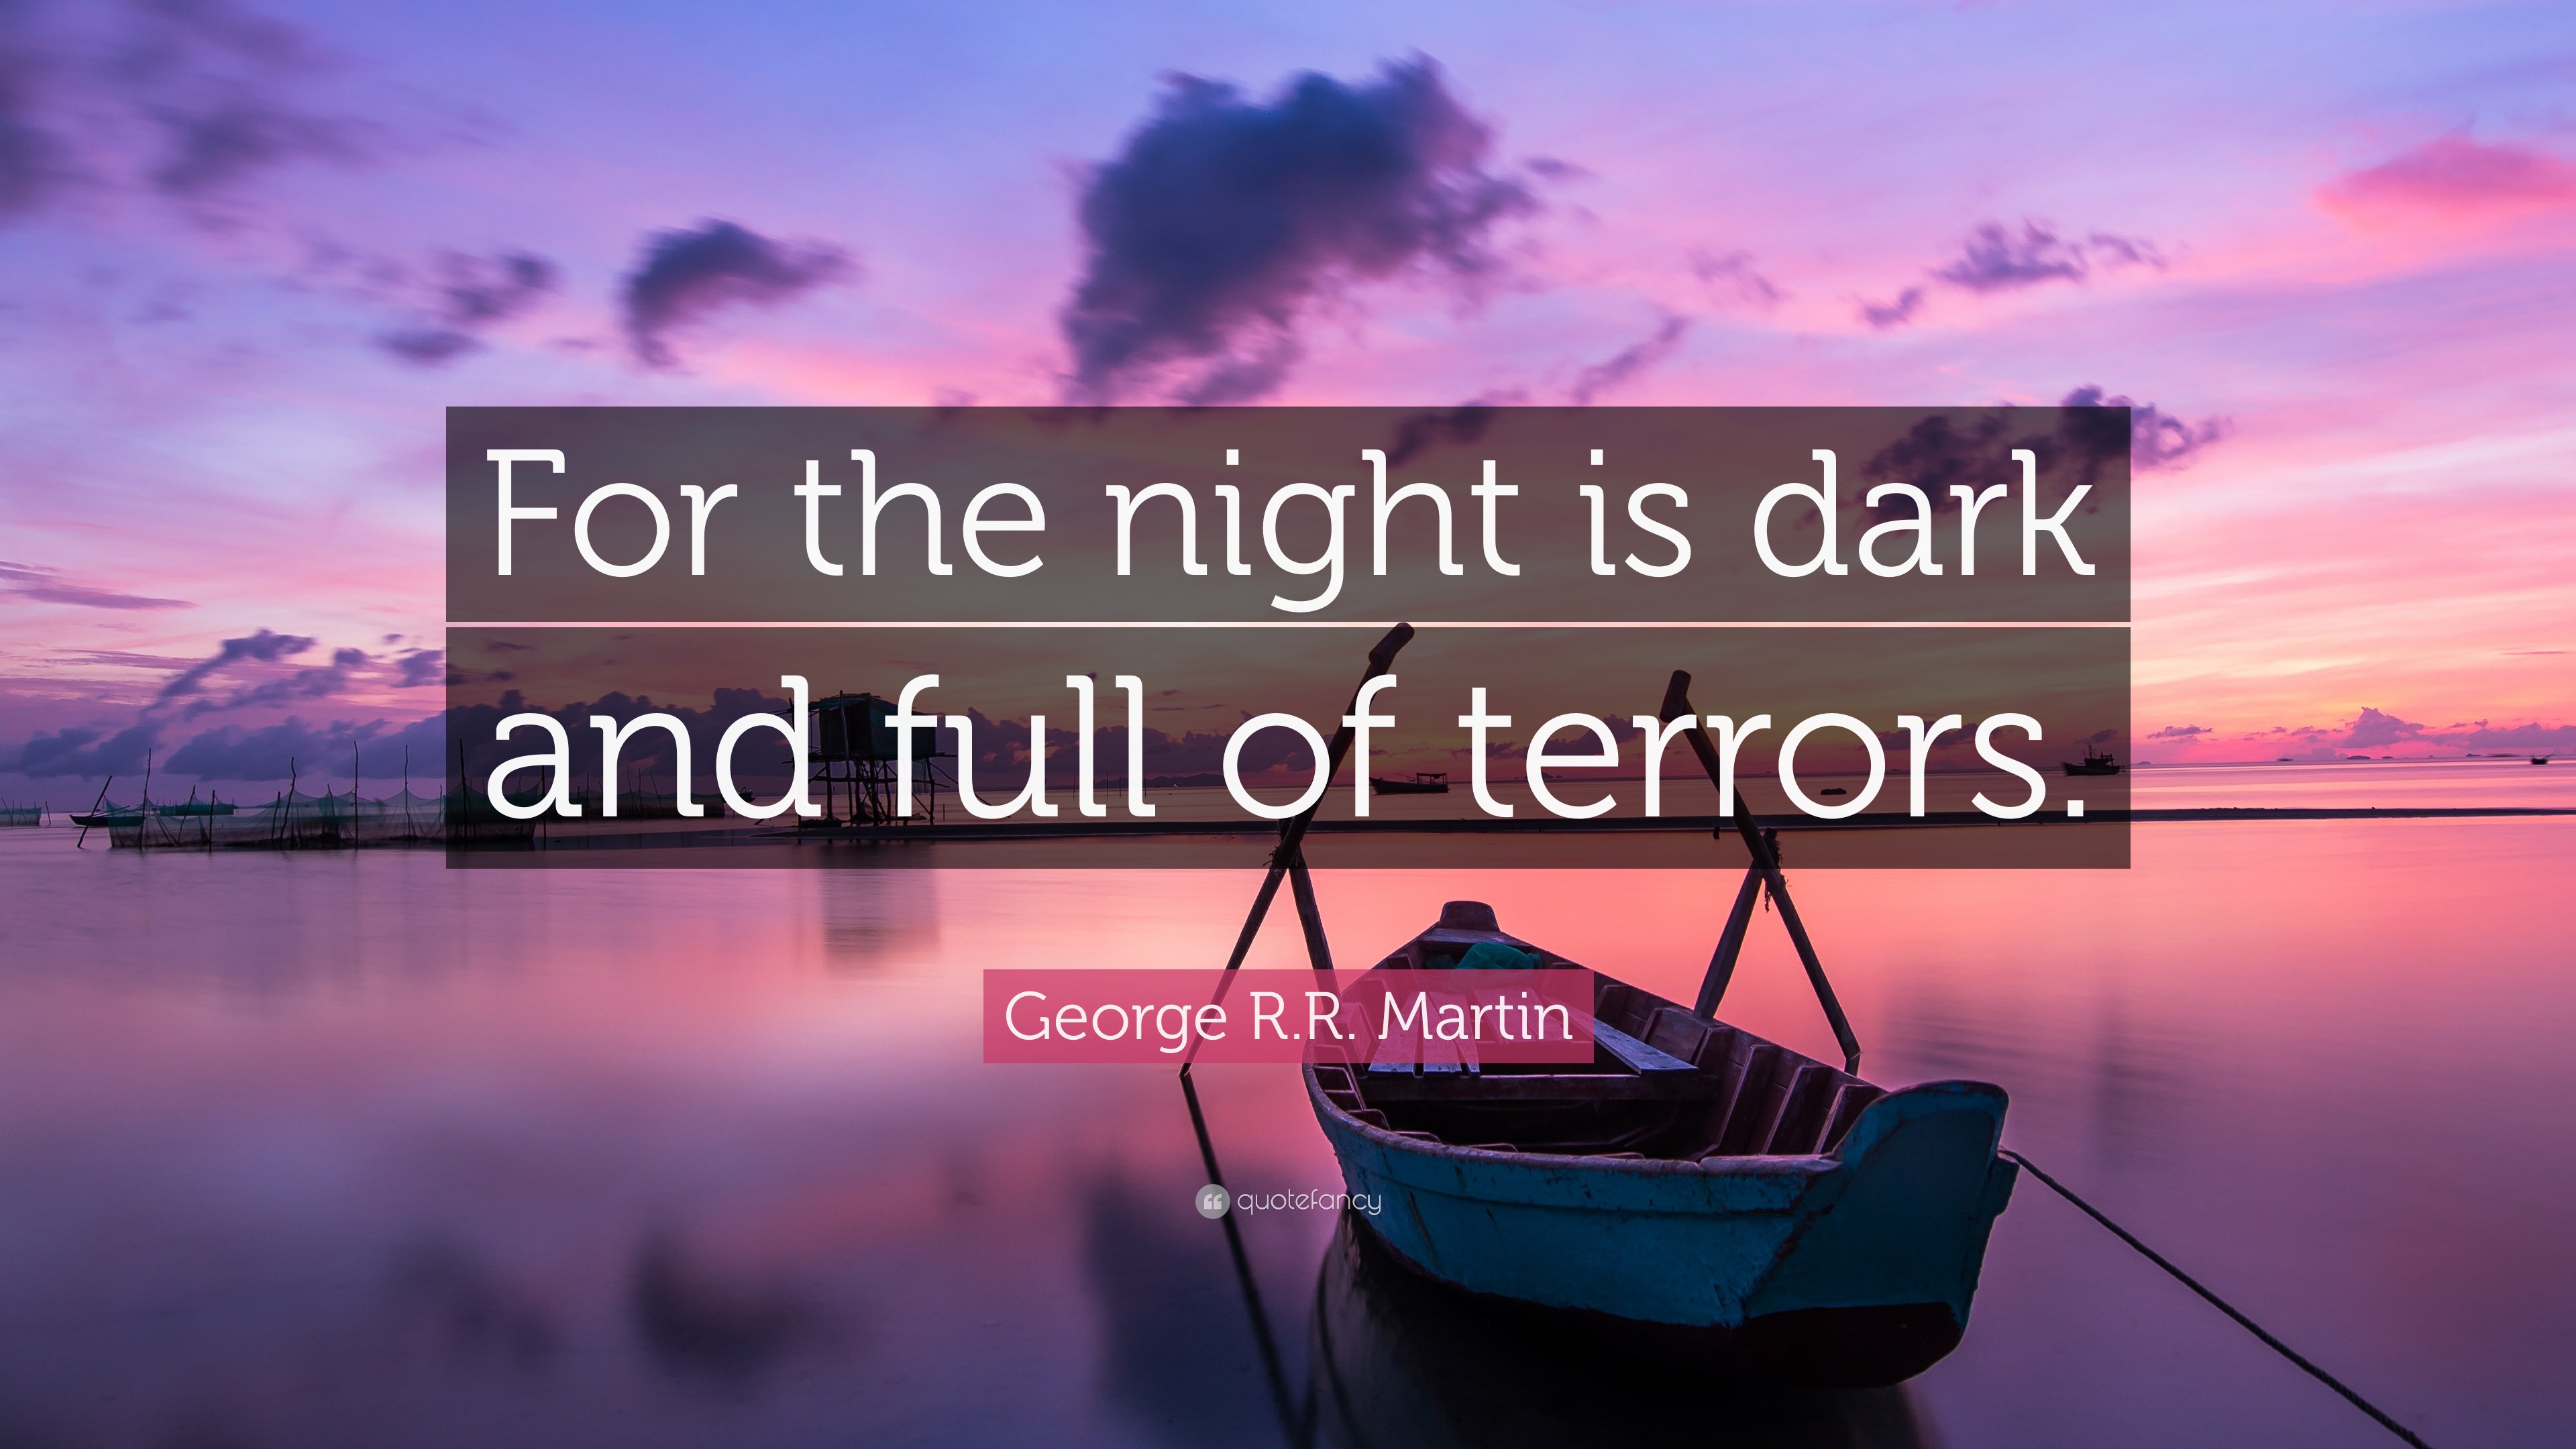 Quotes About Night (40 wallpapers) - Quotefancy